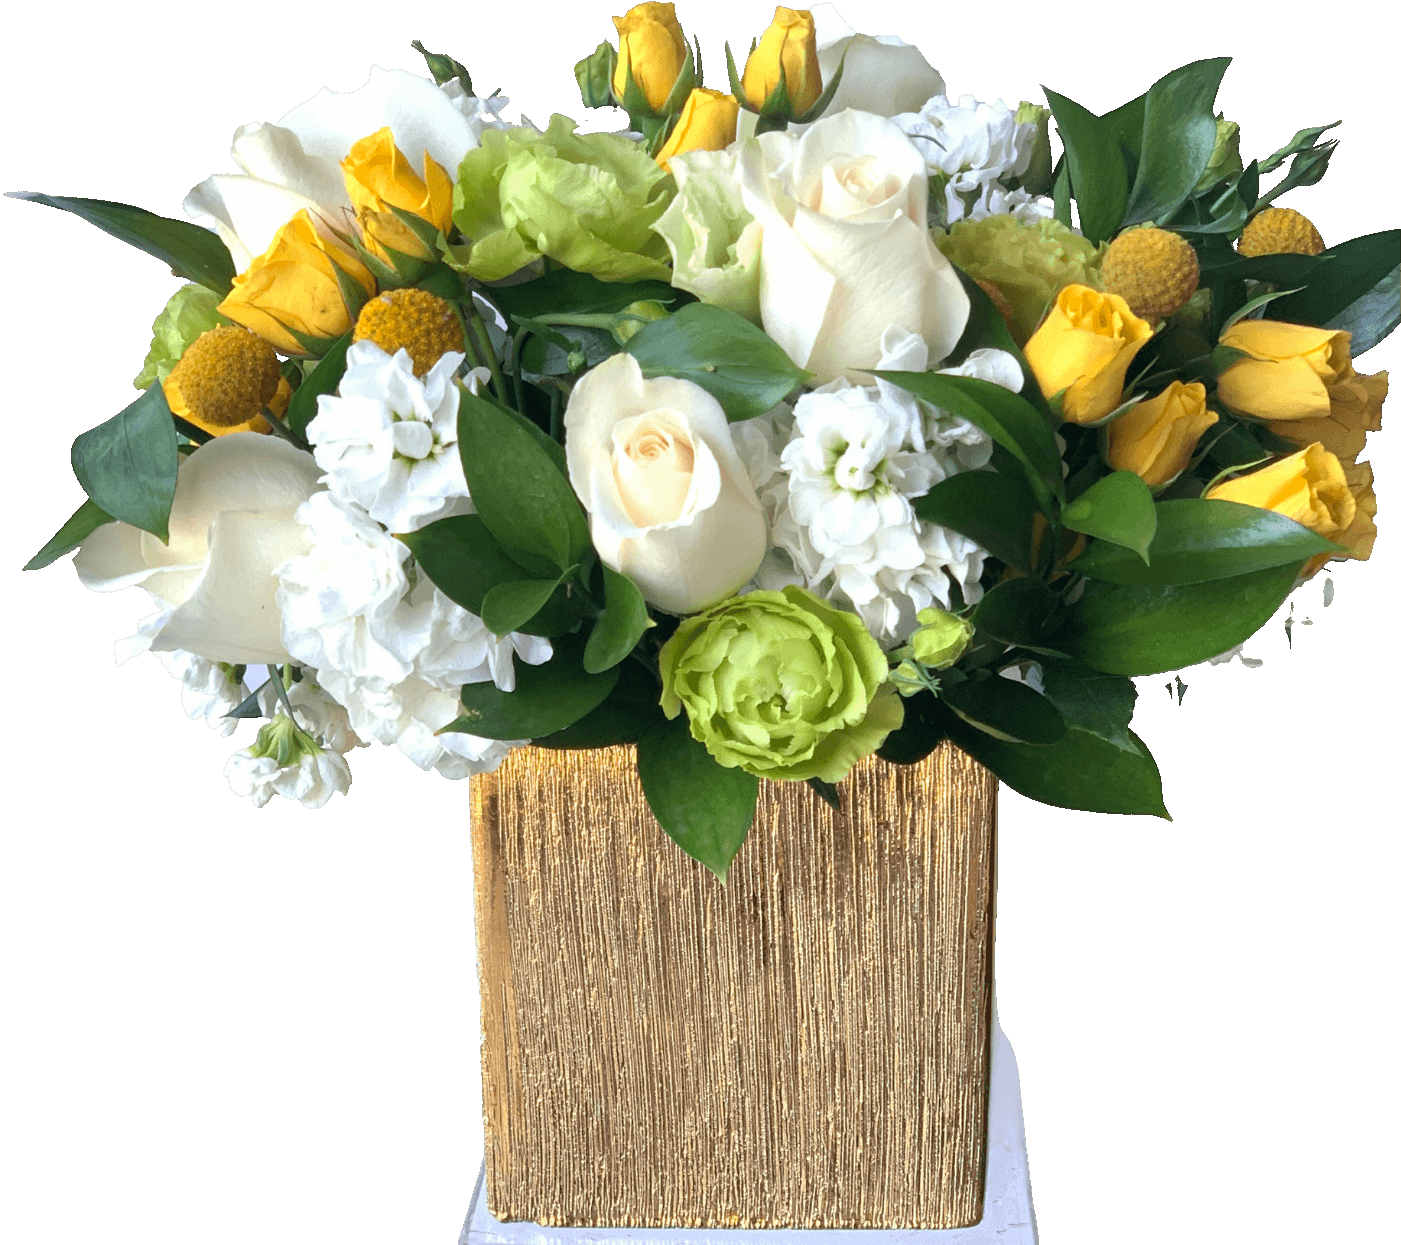 Bright blooms with roses, lisianthus, spray roses